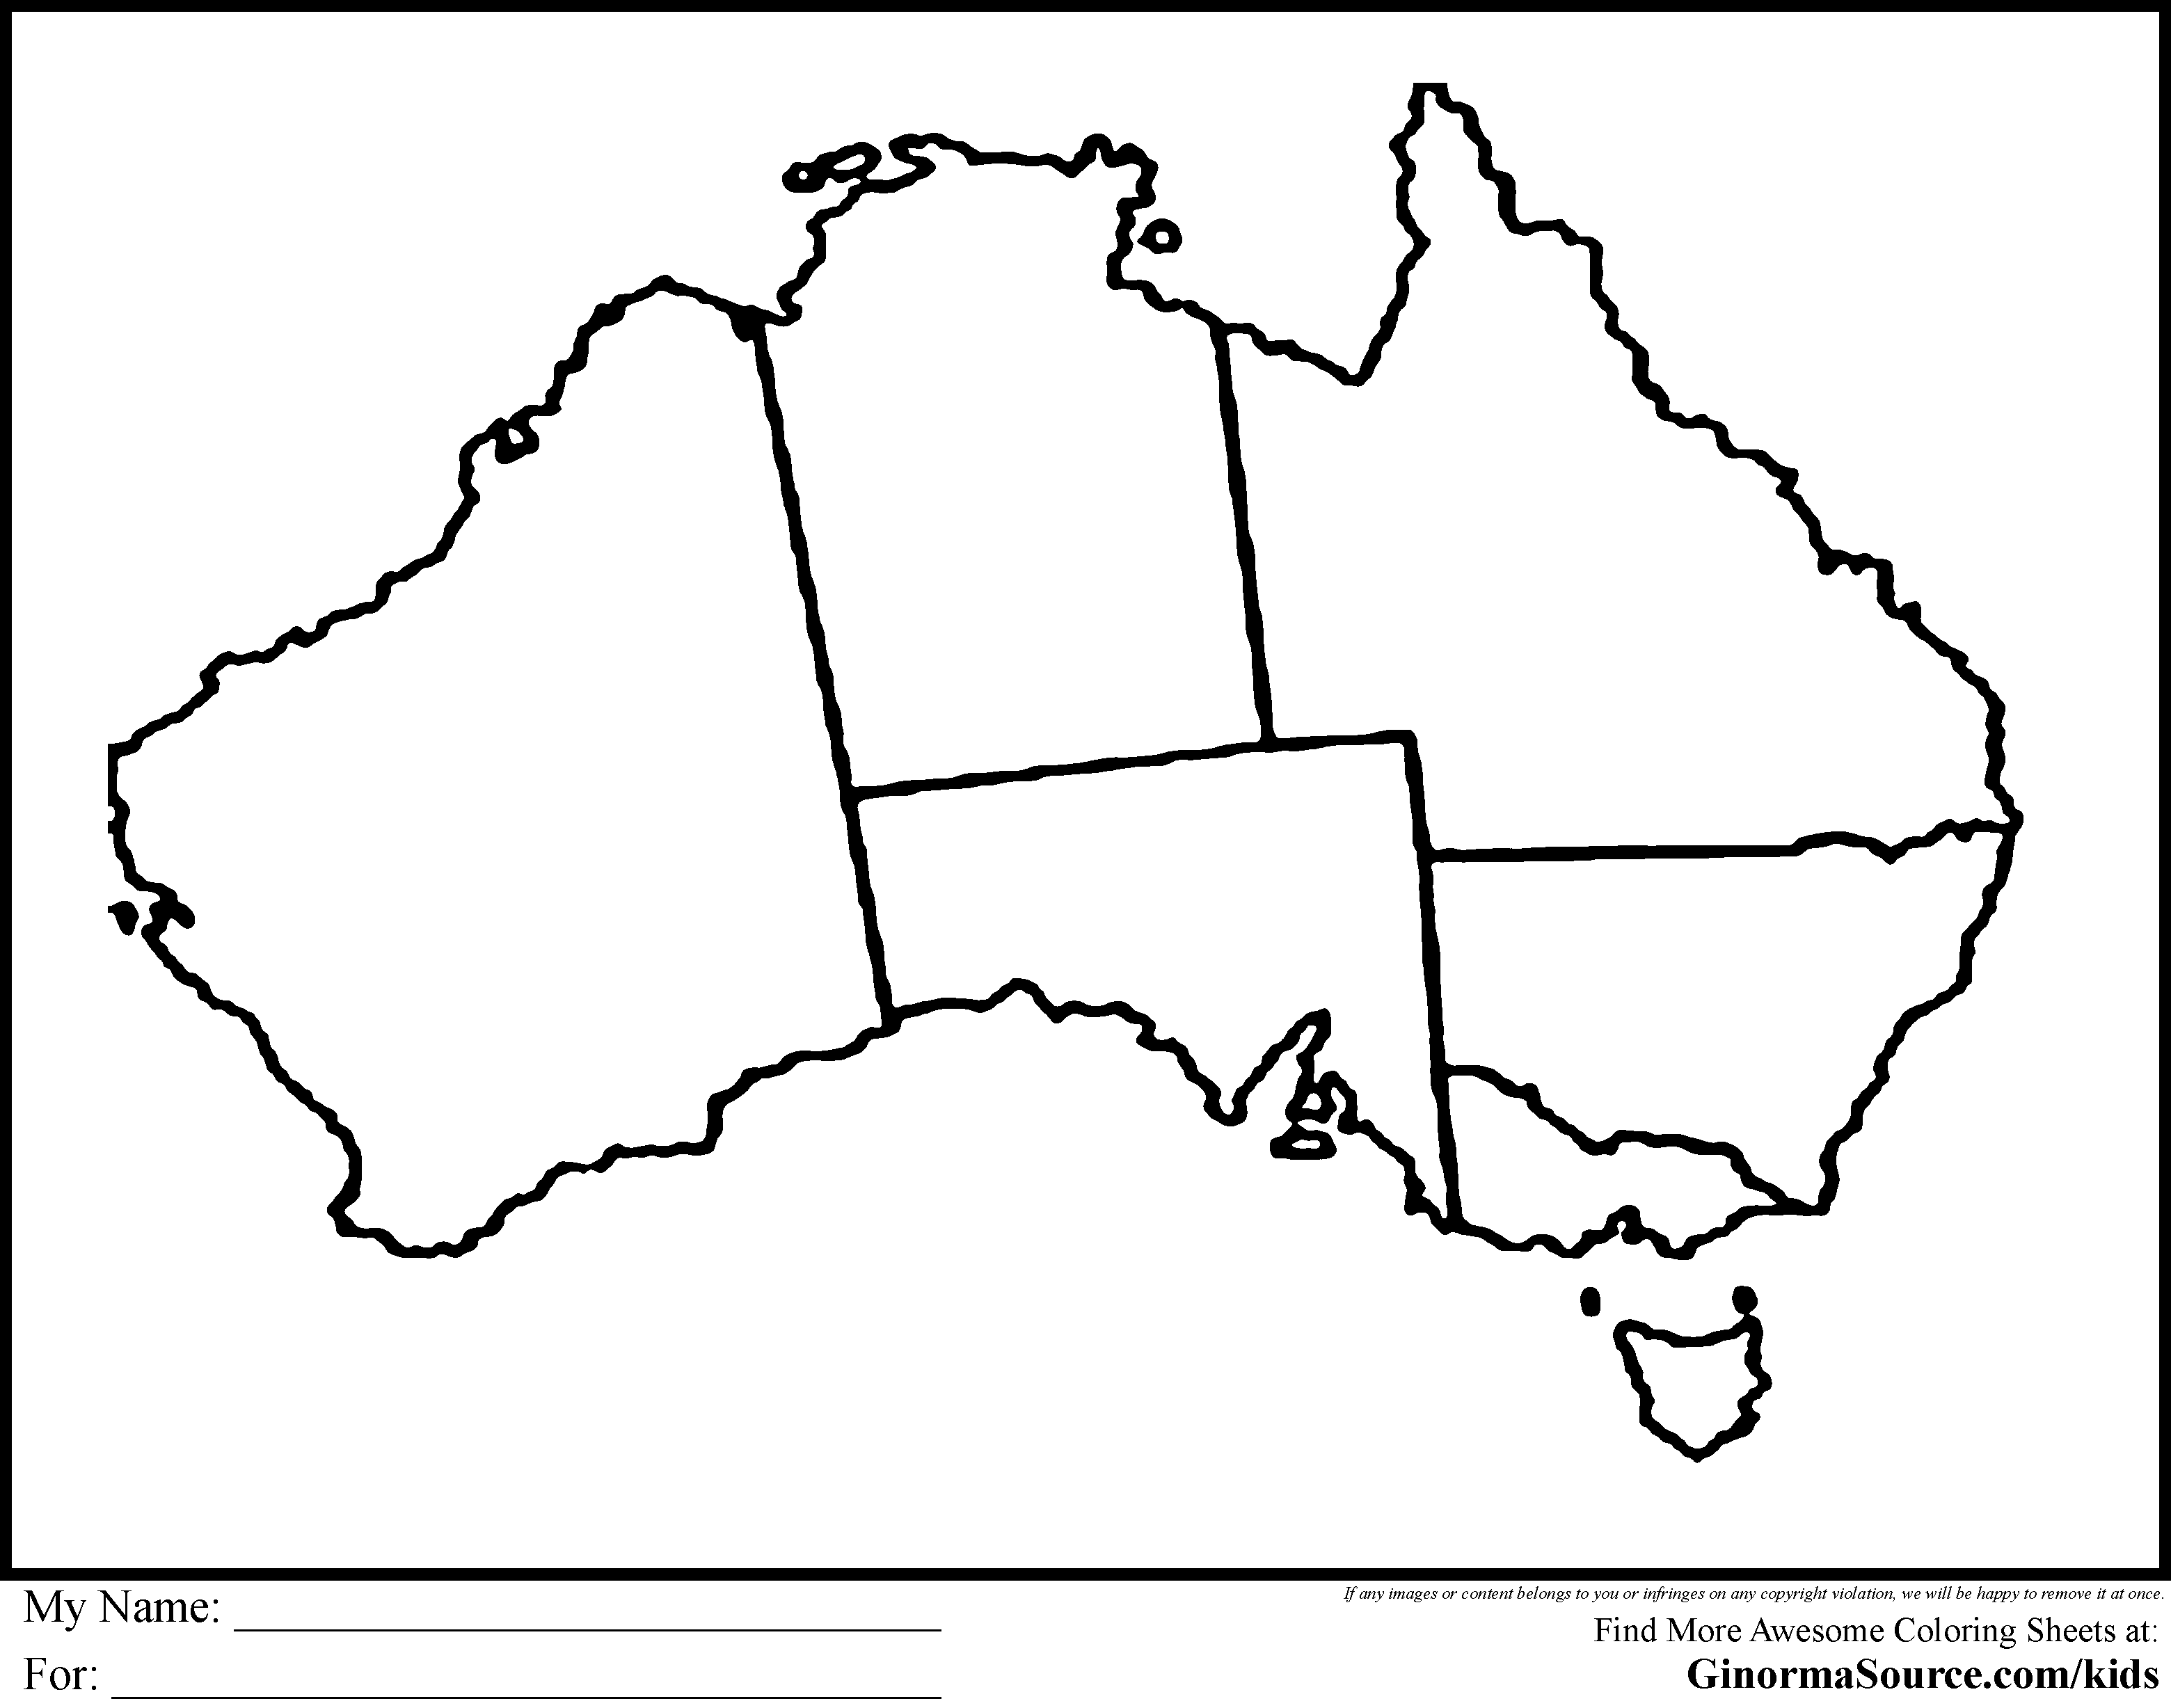 free-australia-coloring-page-download-free-australia-coloring-page-png